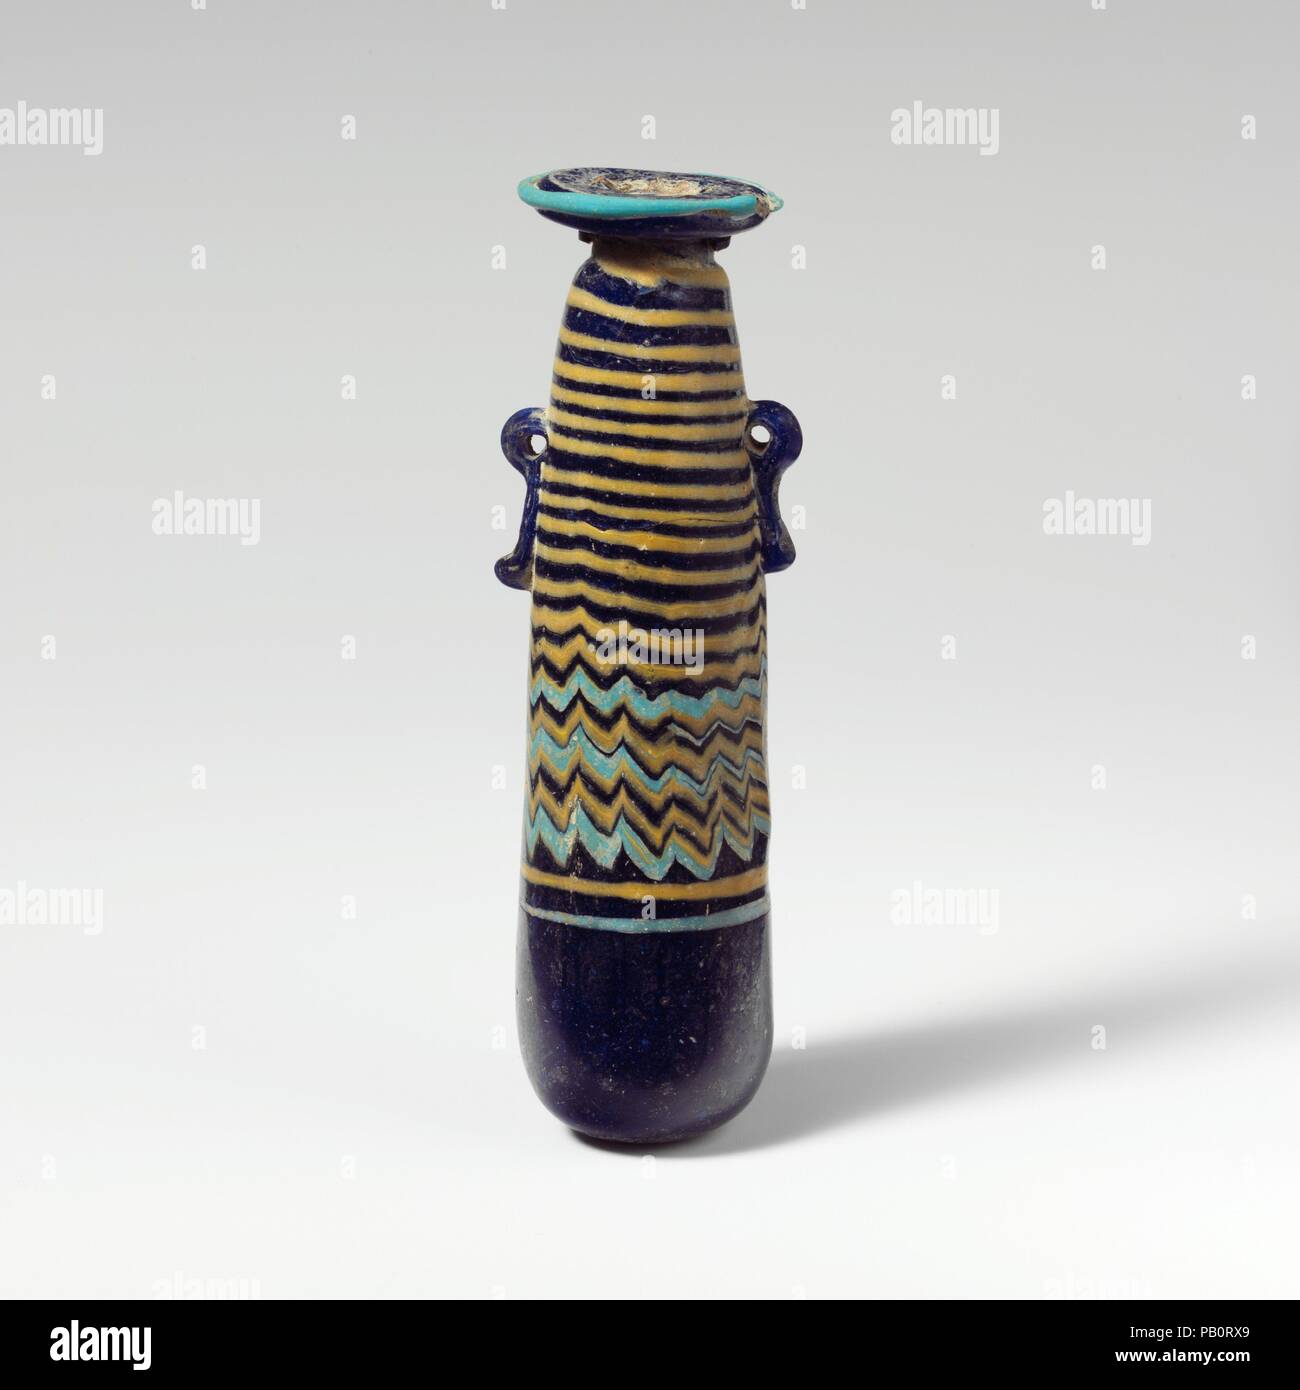 Glass alabastron (perfume bottle). Culture: Greek, Eastern Mediterranean. Dimensions: H.: 4 5/16 in. (11 cm). Date: late 6th-5th century B.C..  Translucent cobalt blue, with handles in same color; trails in opaque yellow and opaque turquoise blue.  Broad, uneven horizontal rim-disk, with slightly raised edge around mouth; short cylindrical neck; narrow rounded shoulder; straight-sided cylindrical body, tapering upwards; convex bottom; two vertical ring handles with knobbed tails, applied over trail decoration.  Turquoise blue trail attached at edge of rim-disk; a yellow trail applied on unders Stock Photo